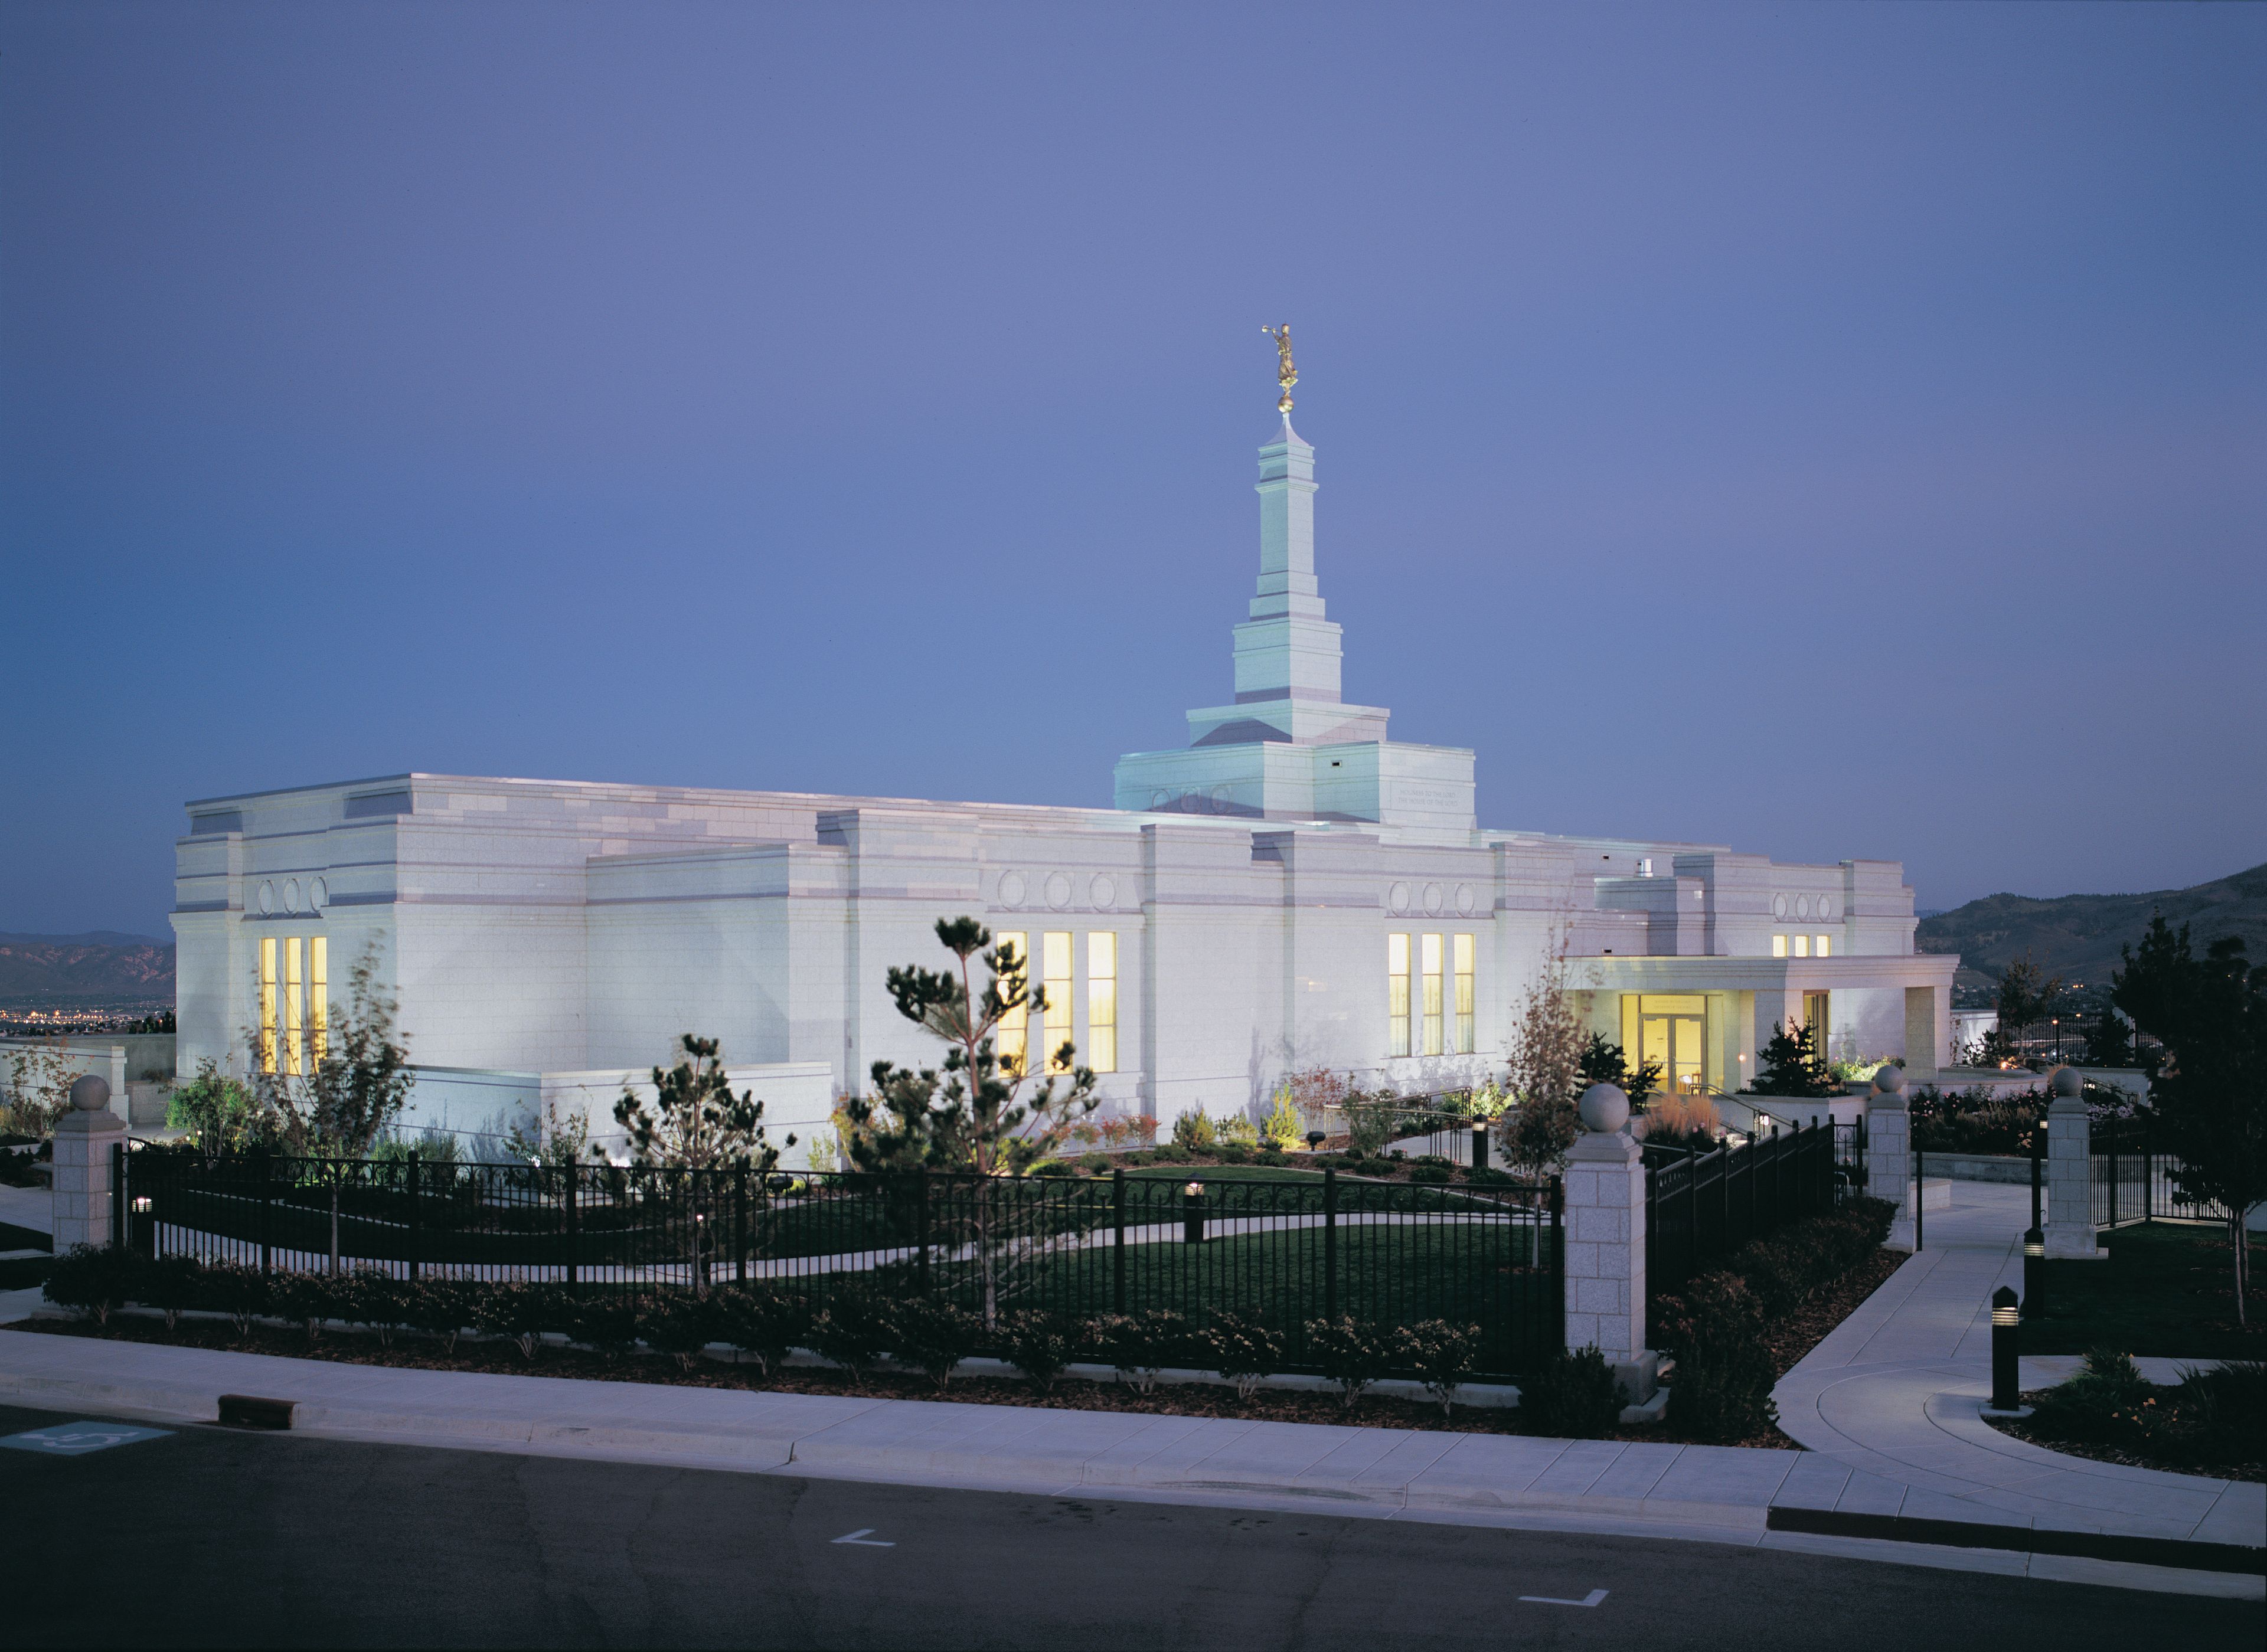 The Reno Nevada Temple in the late evening.